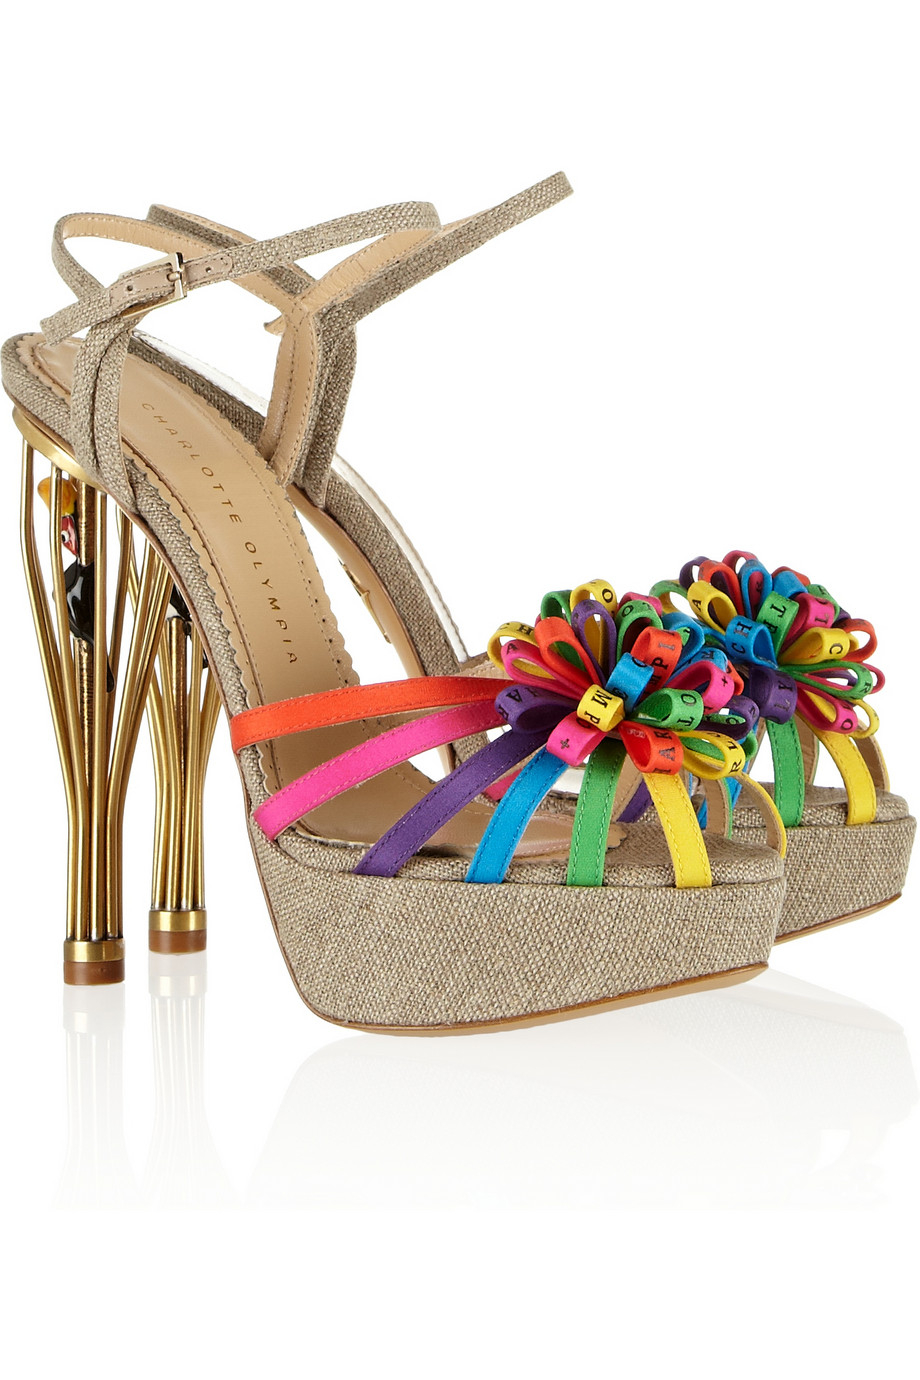 Lyst - Charlotte olympia Birds Of Paradise Canvas Sandals in Metallic